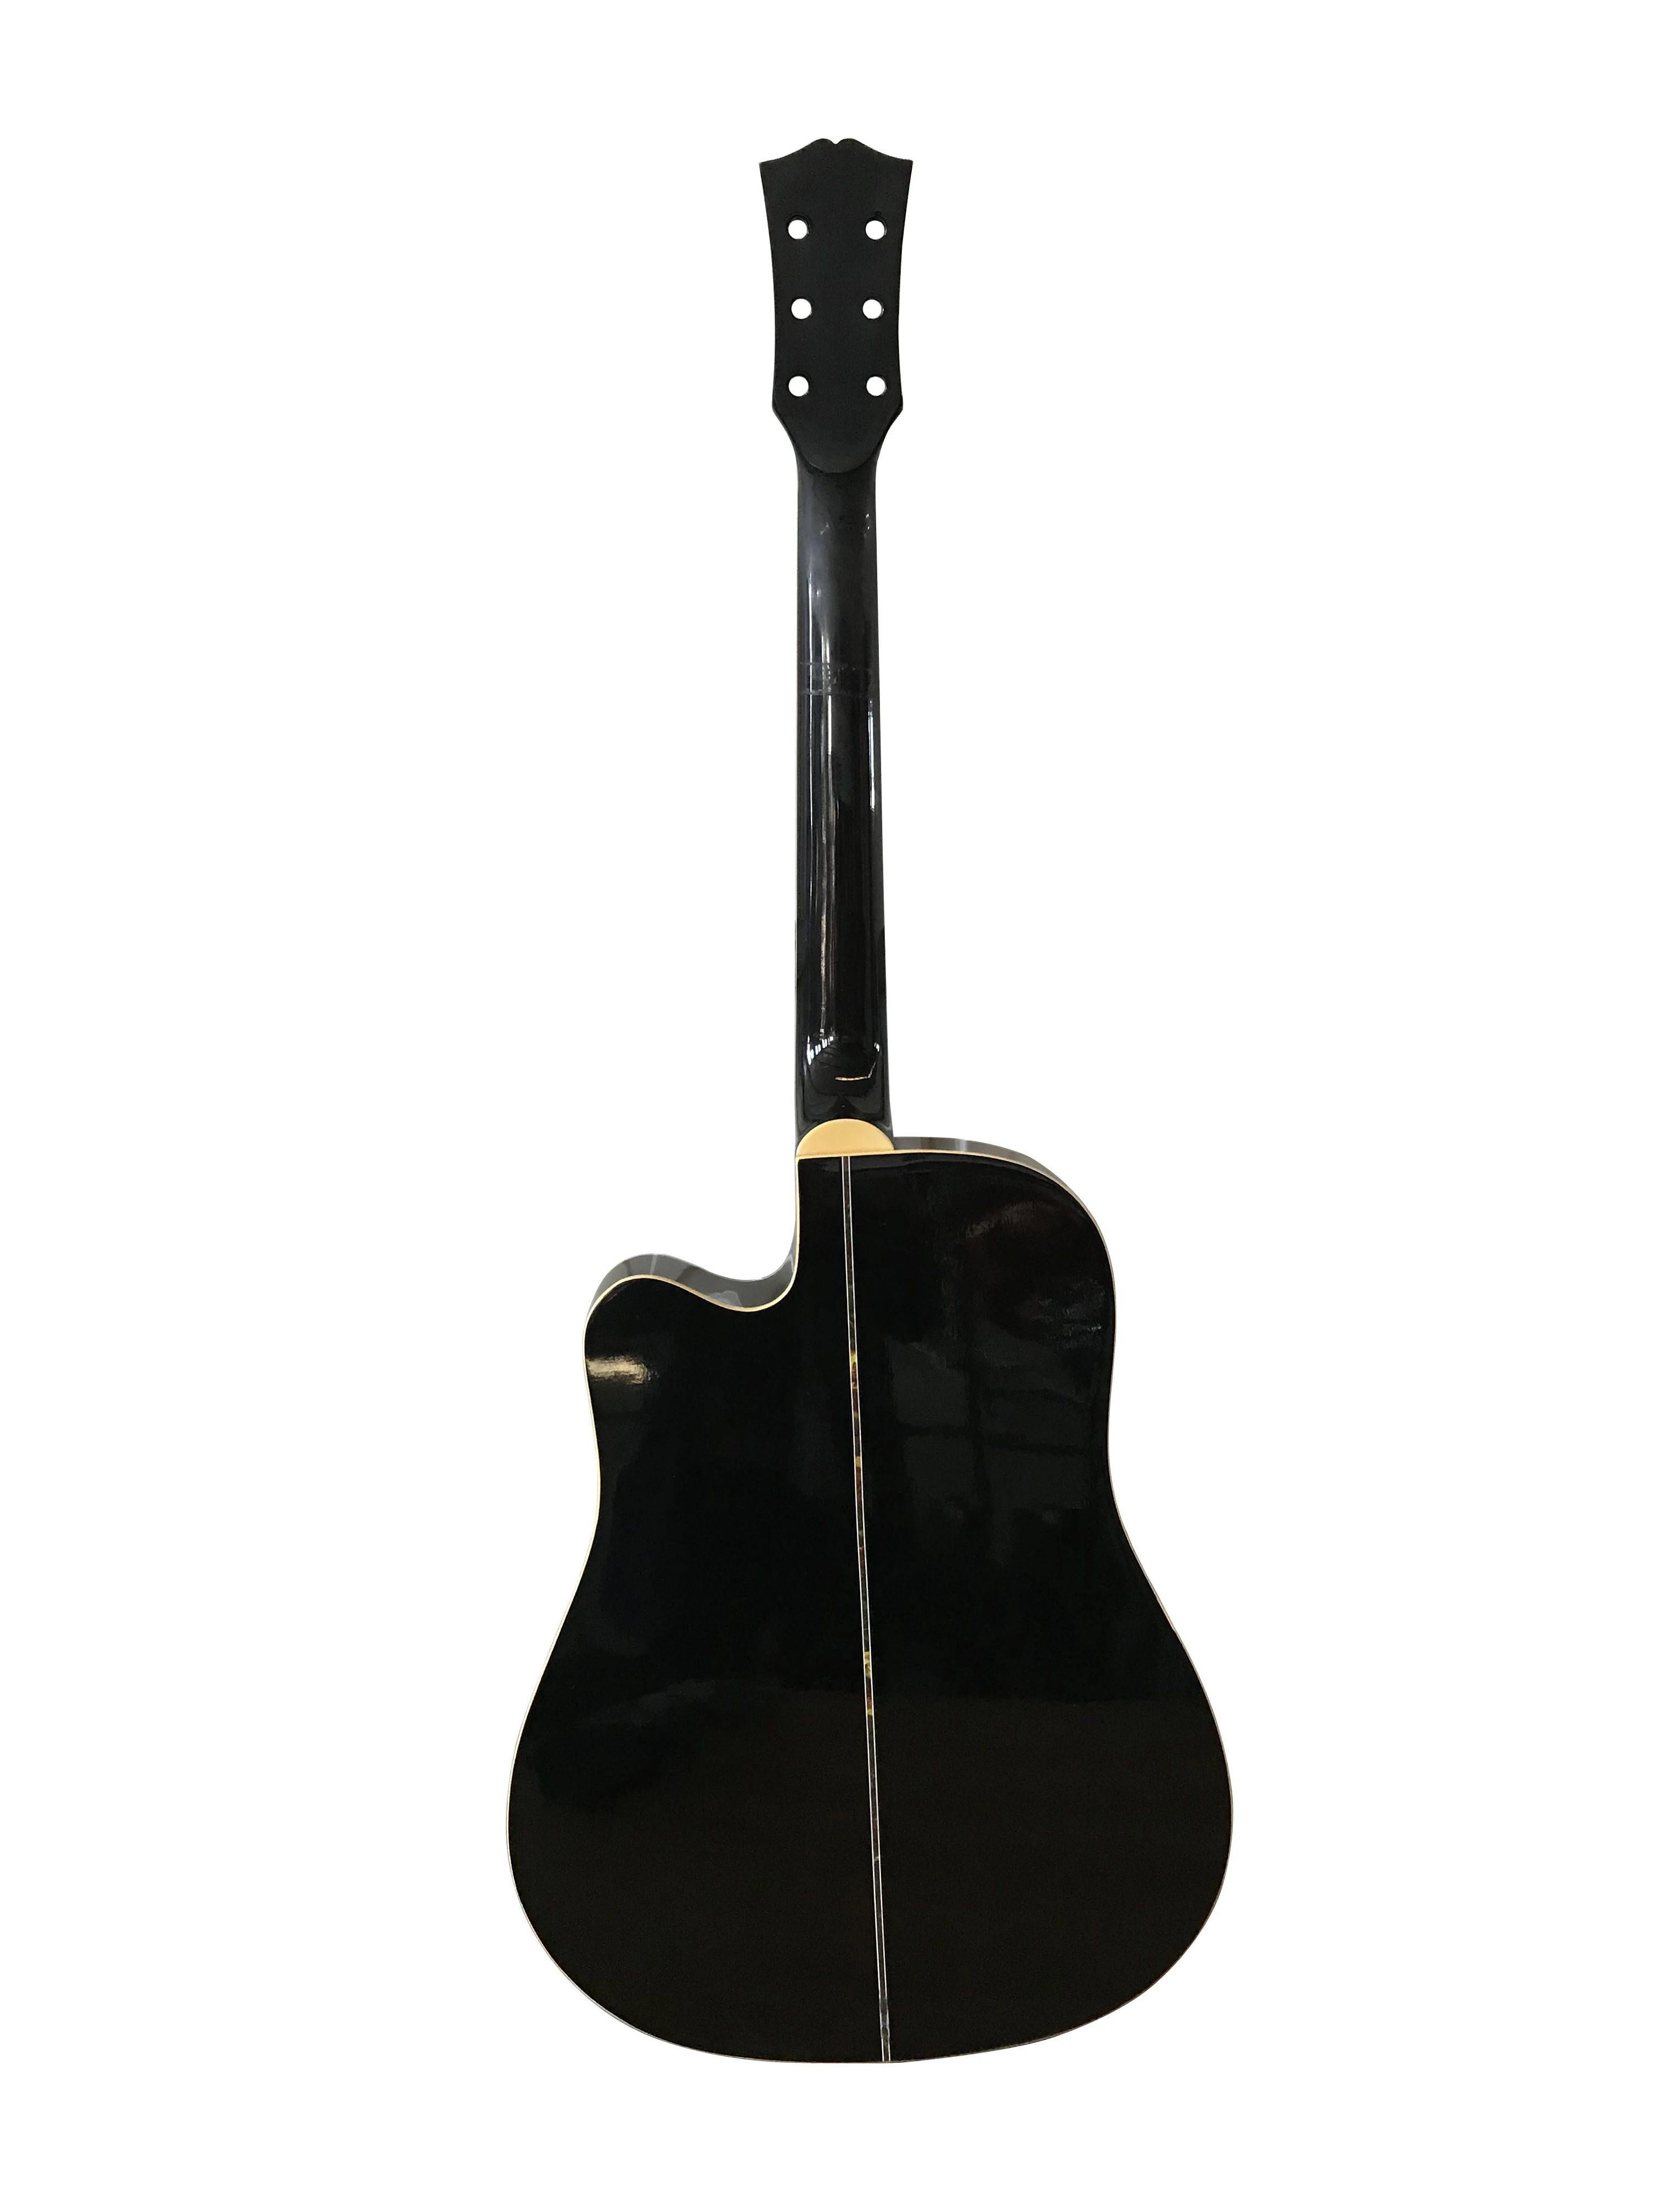 Beautiful Gloss Thin Body Acoustic Guitar Unfinished Spruce 41 Inch 24 Fret Solid Wood DIY 6 Strings Black Color Folk Guitar enlarge